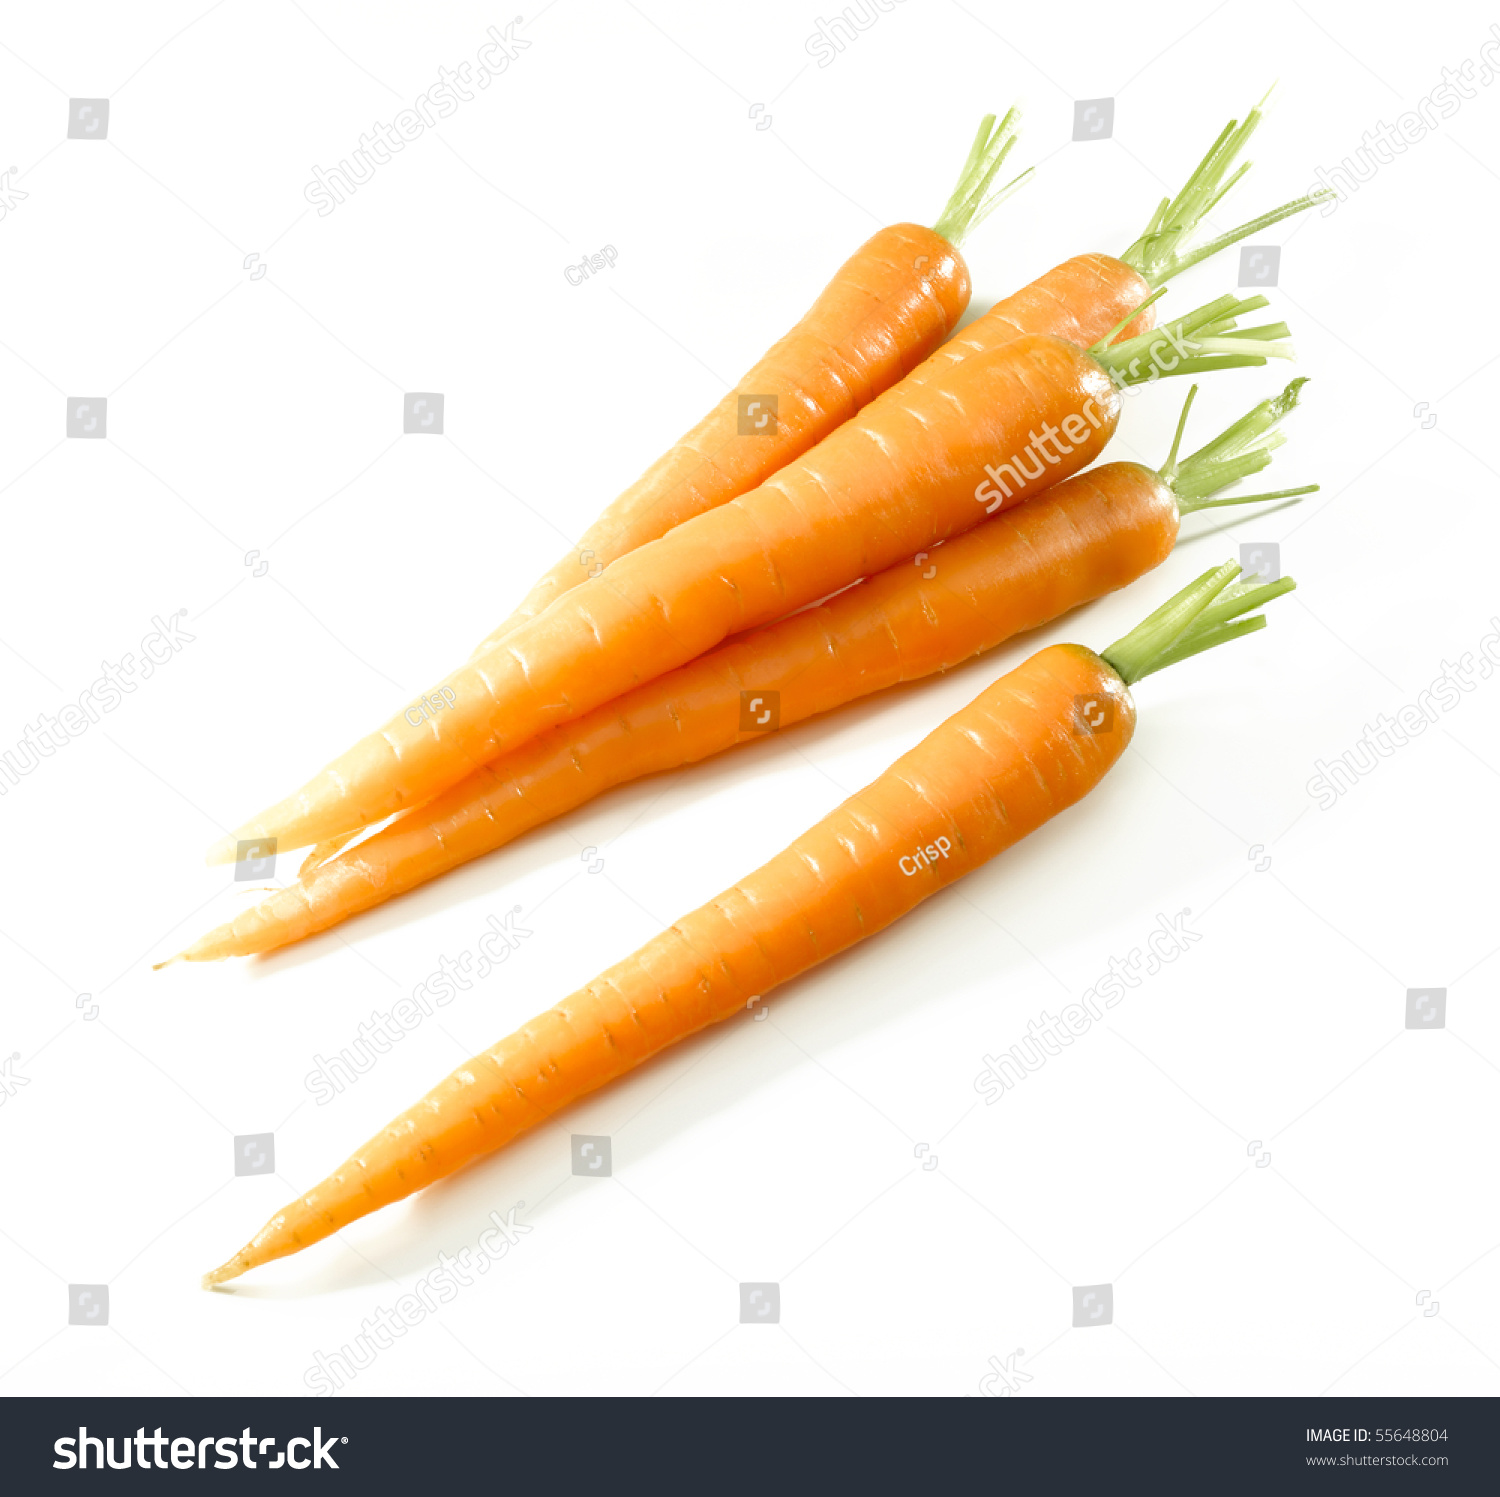 Group Carrots On White Background Stock Photo (Royalty Free ...